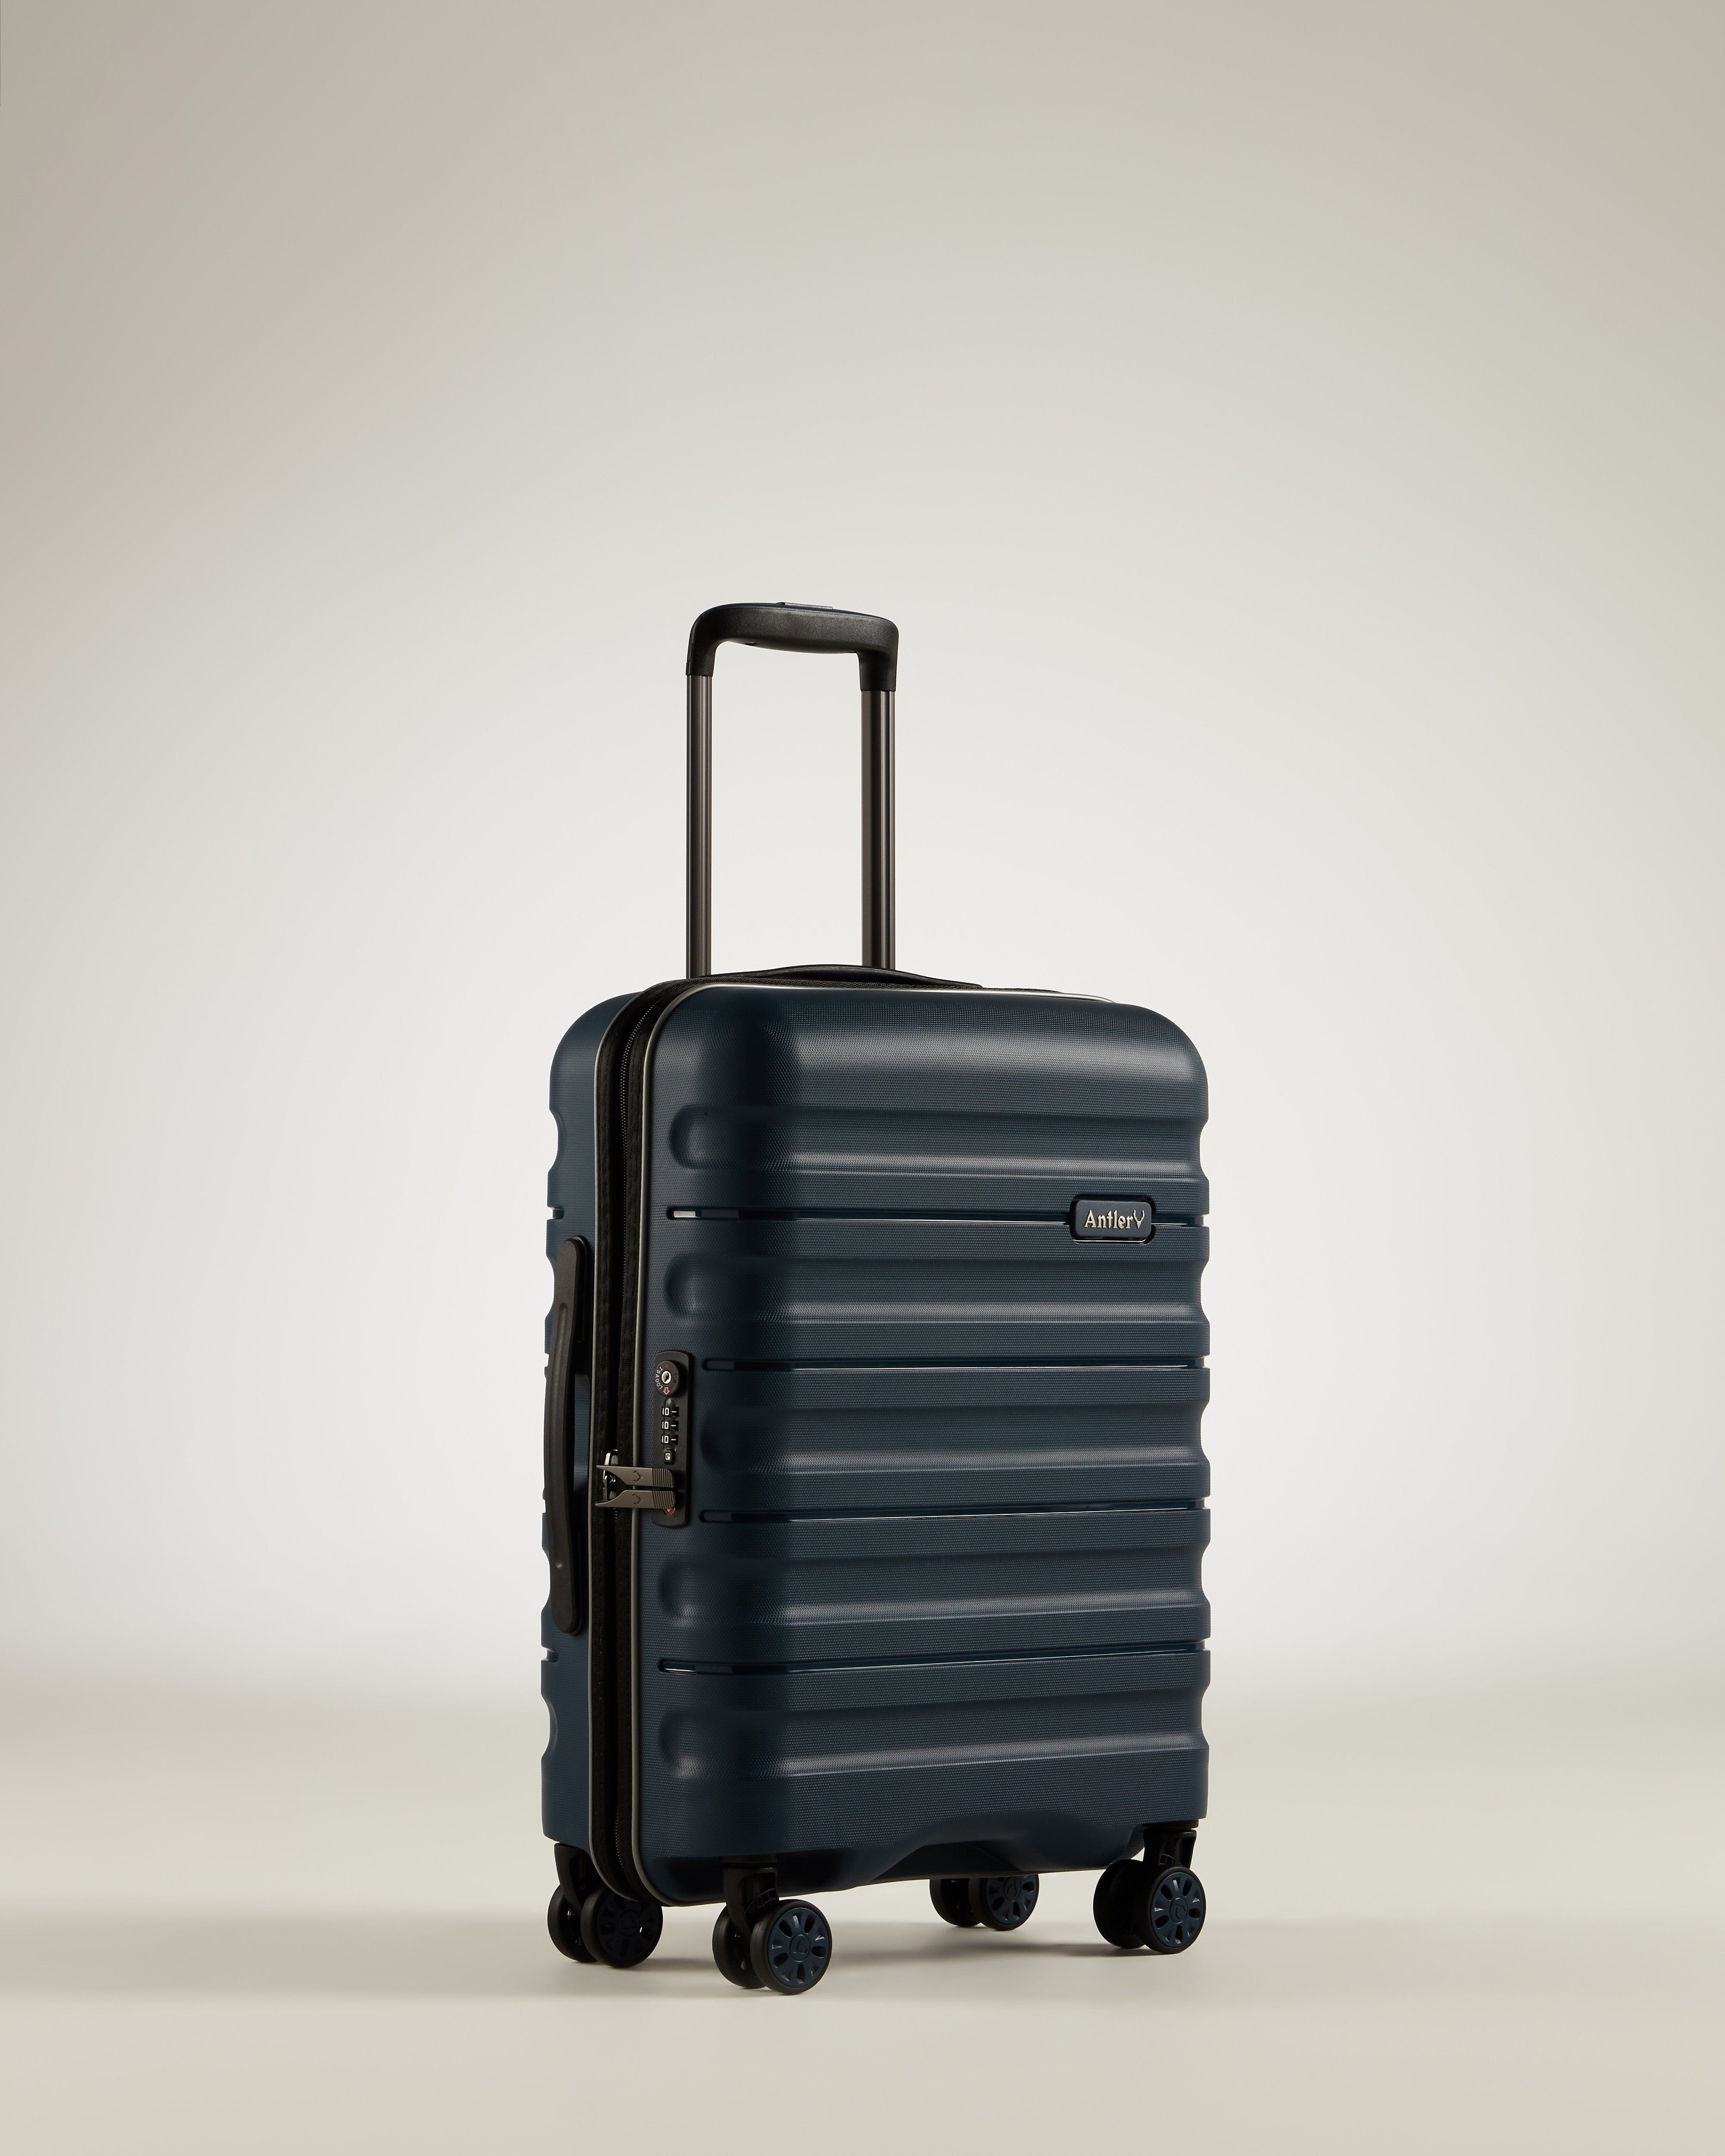 View Antler Lincoln Cabin Suitcase In Navy Size 56 x 35 x 23 cm information